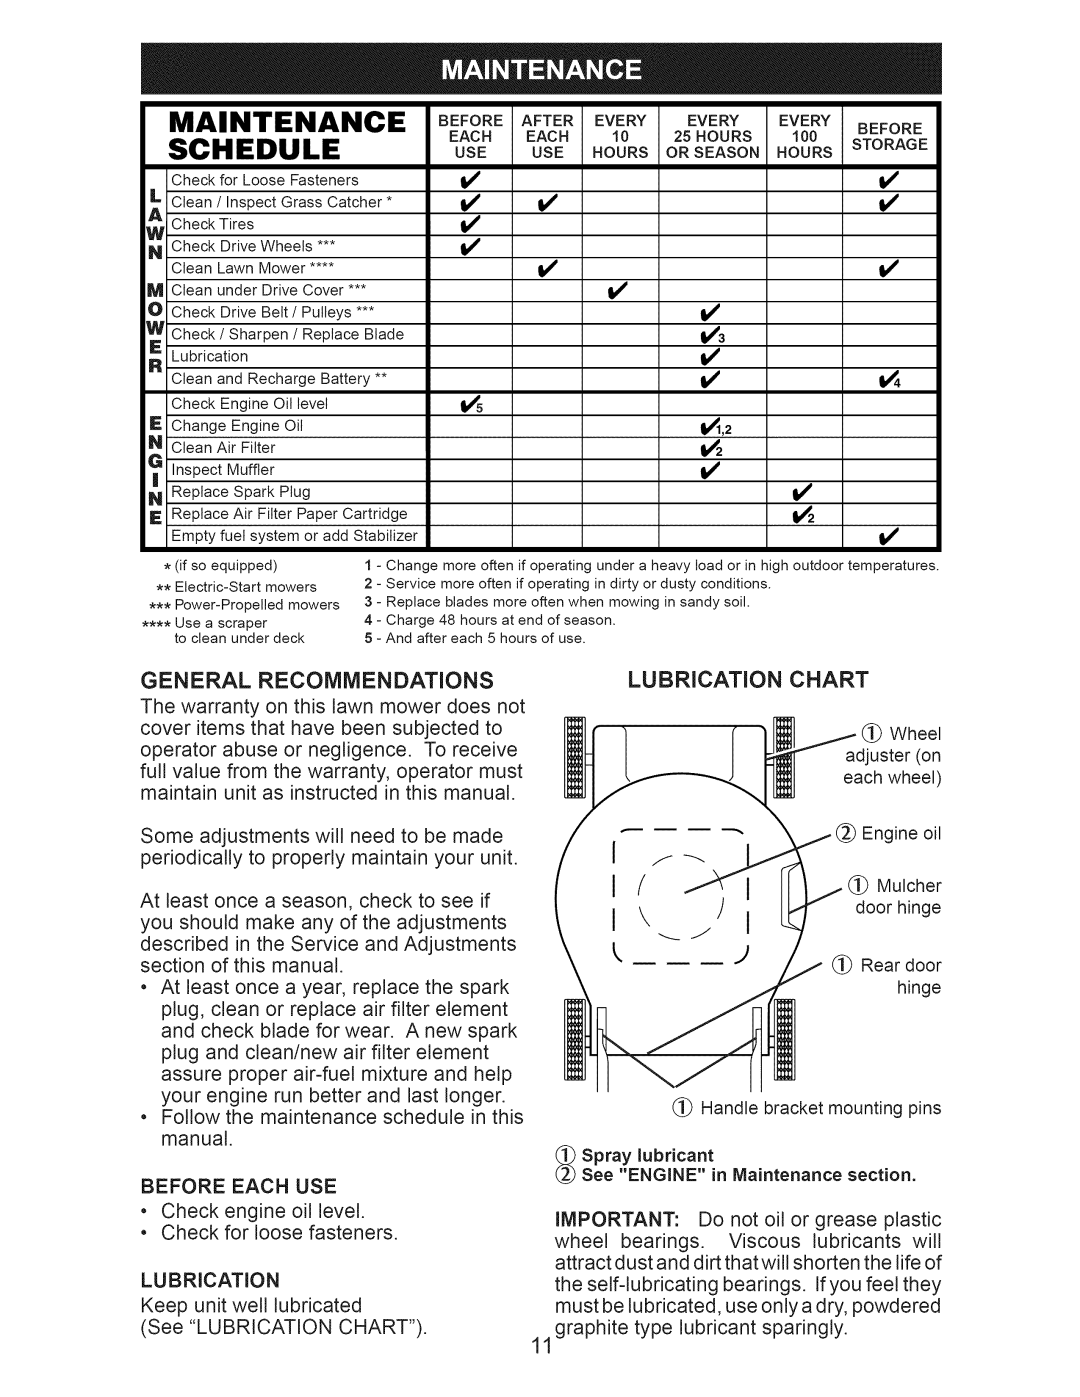 Craftsman 917.389052 owner manual Maintenance, Schedule, Use Hours 